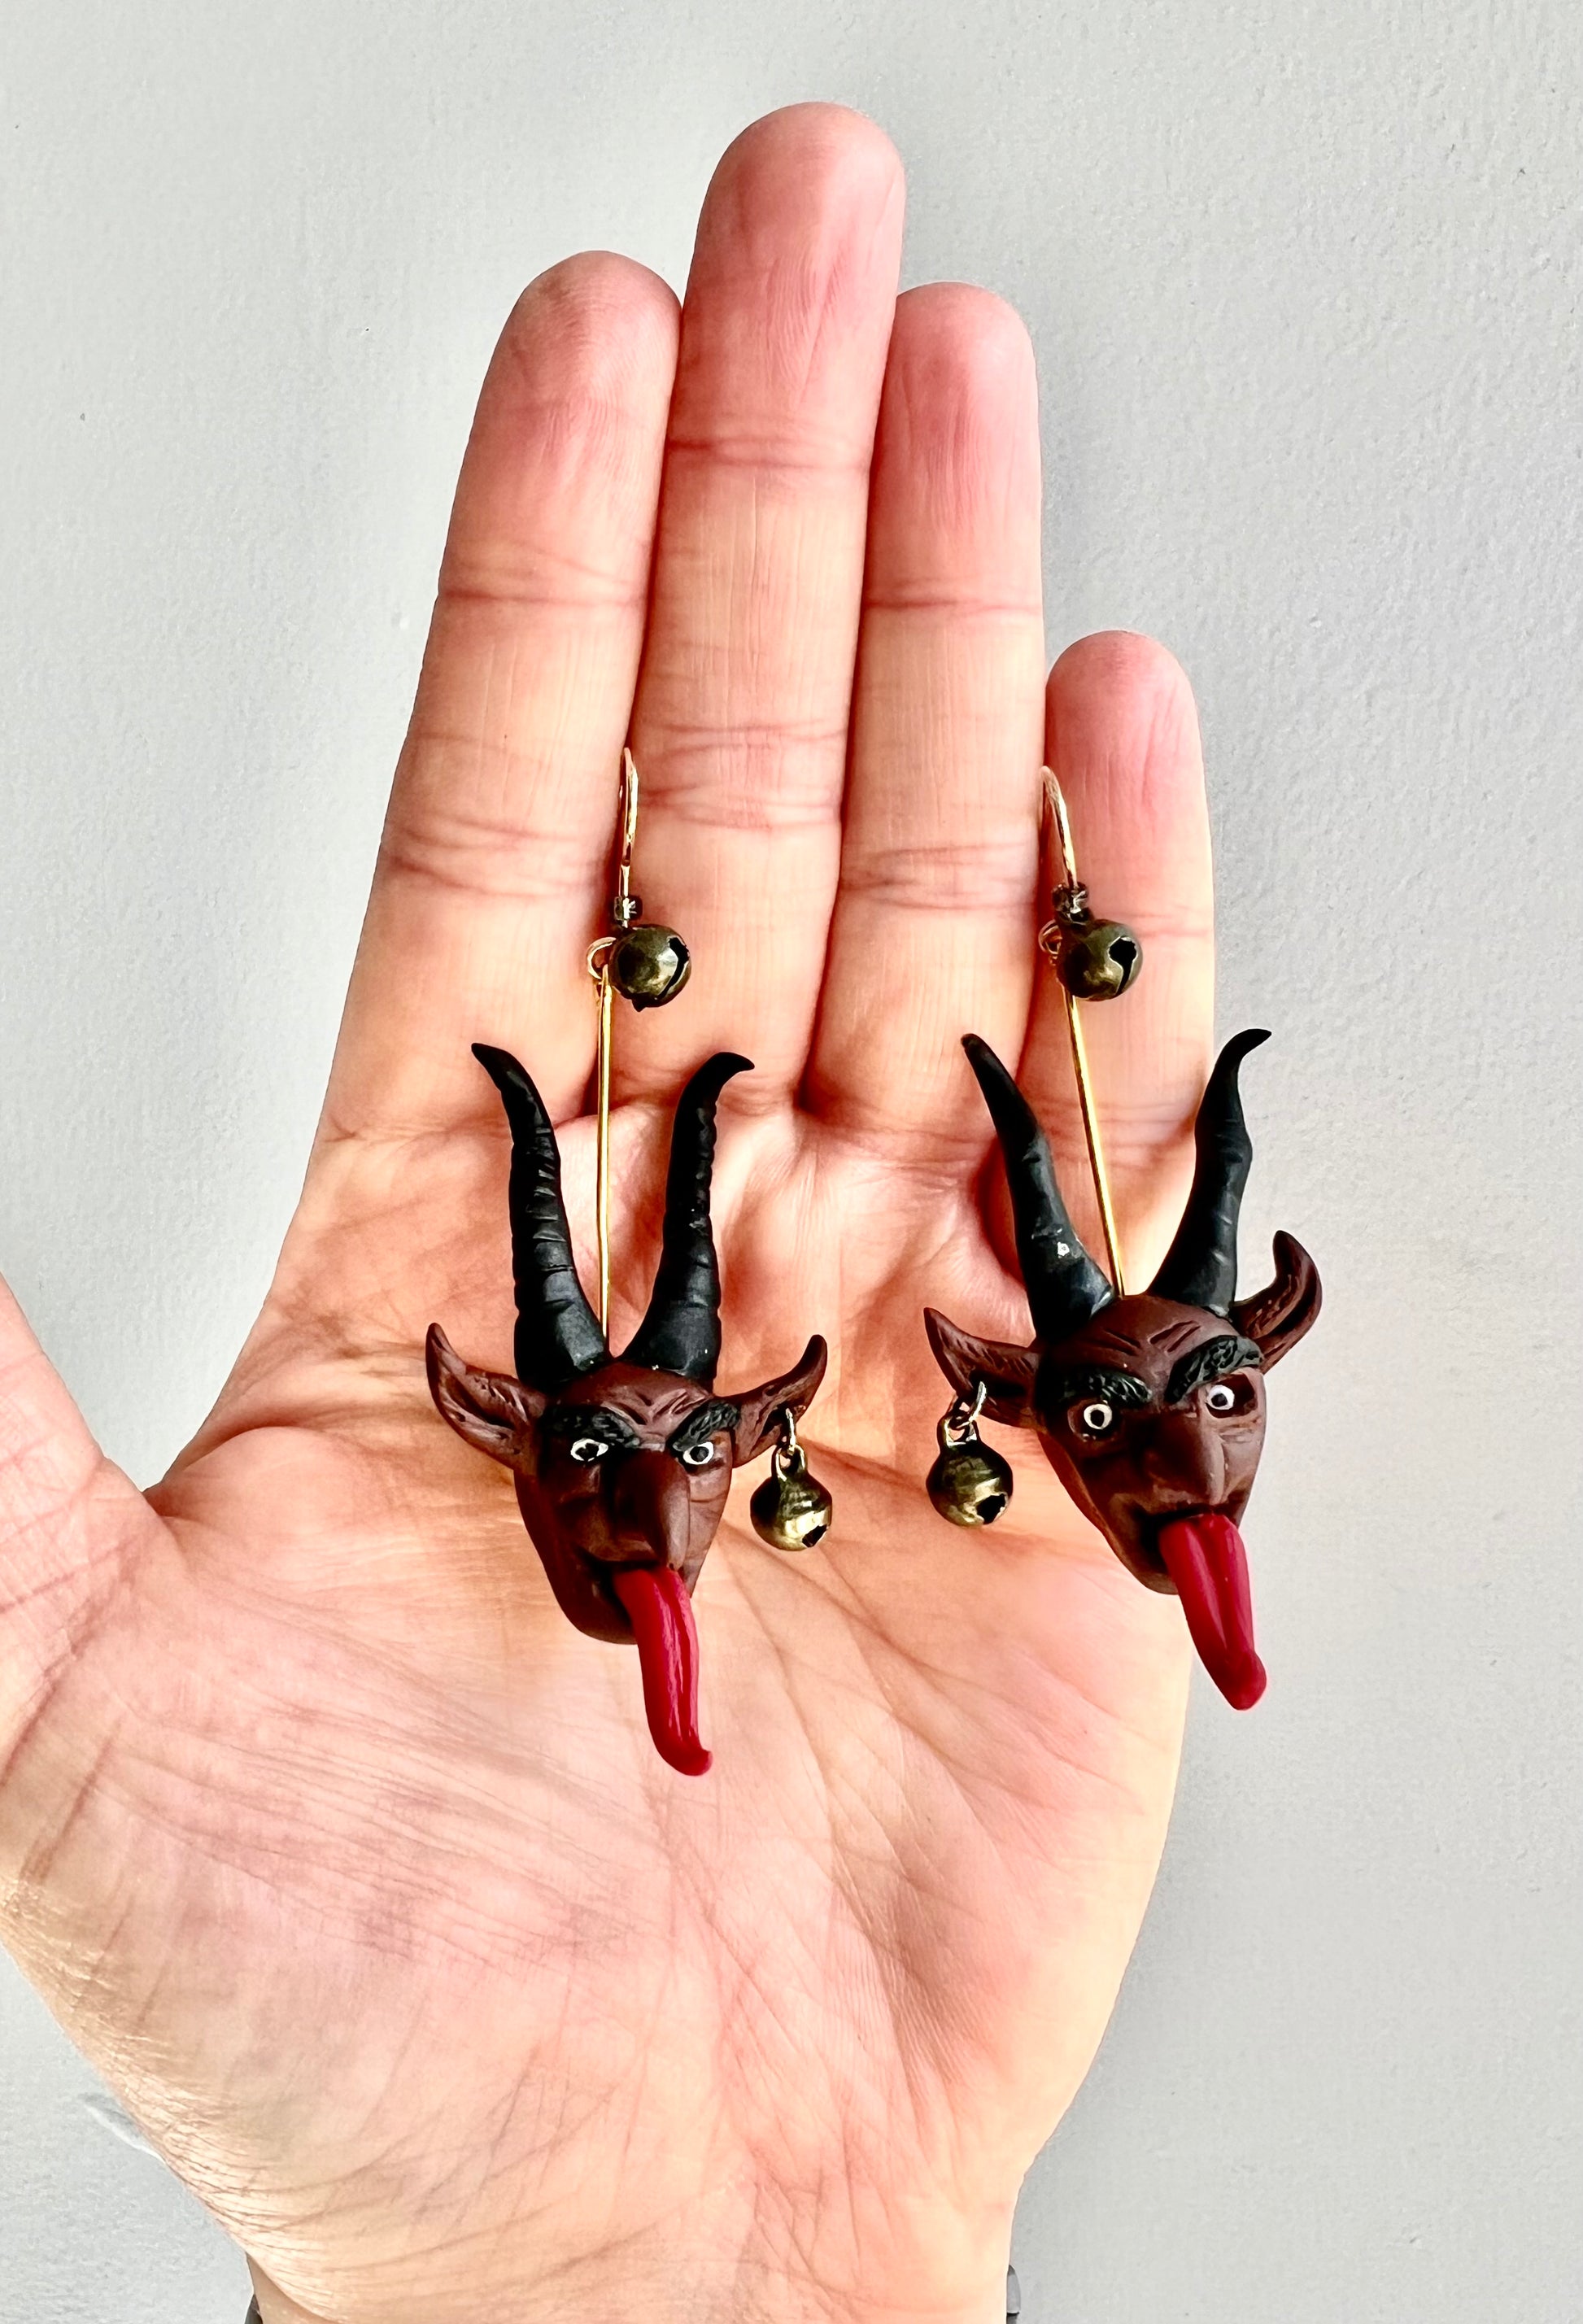 Capture the dark allure of folklore with our Krampus earrings, featuring hand-sculpted details and haunting bells reminiscent of sinister tales."